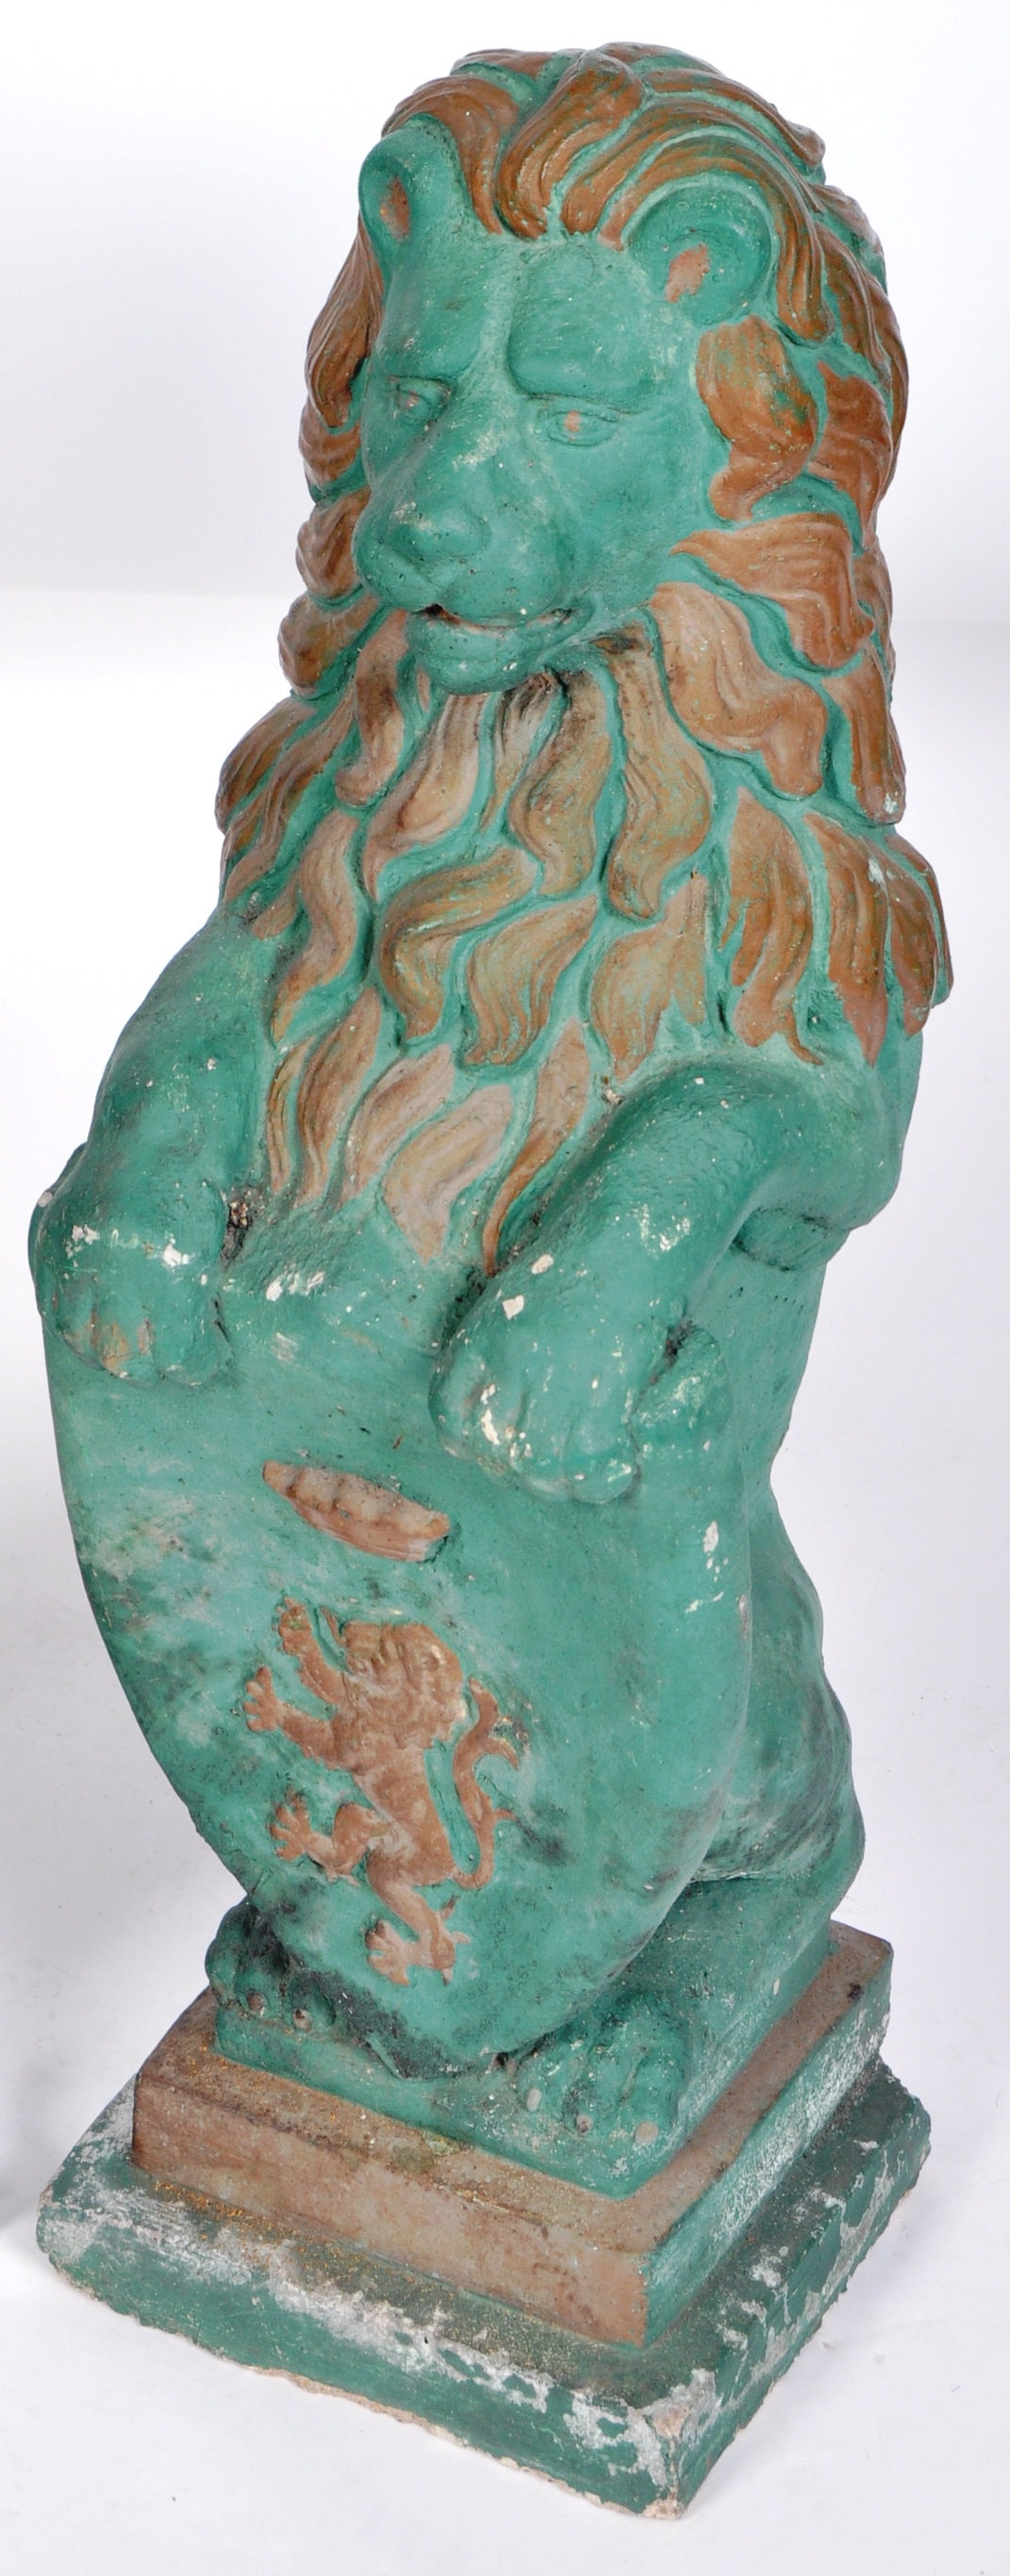 MATCHING PAIR OF PAINTED RECONSTITUTED STONE LION FIGURES - Image 7 of 12